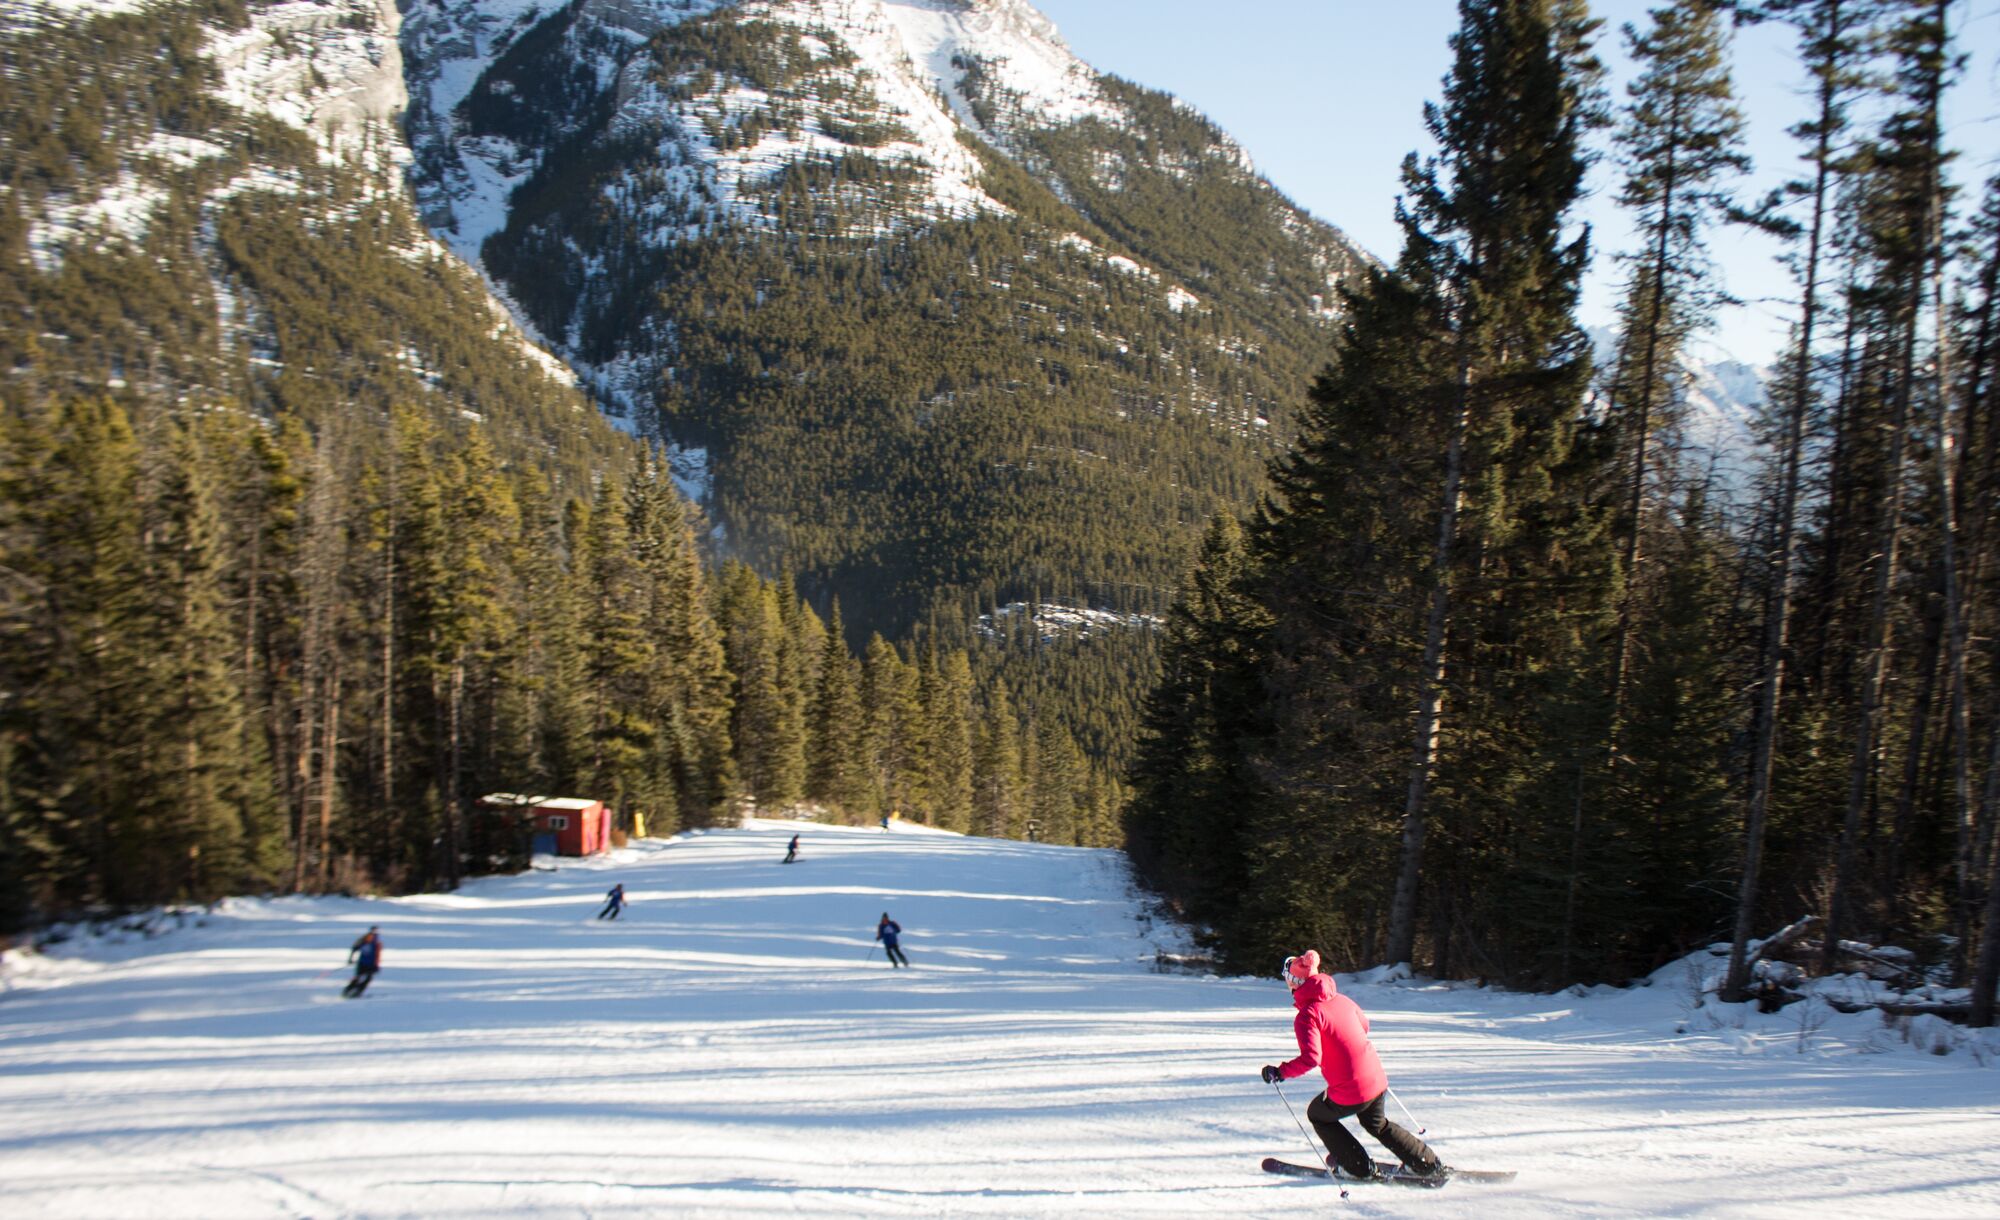 Skiers head down the Crazy Canuck run at Mt. Norquay Ski Resort in Banff National Park.